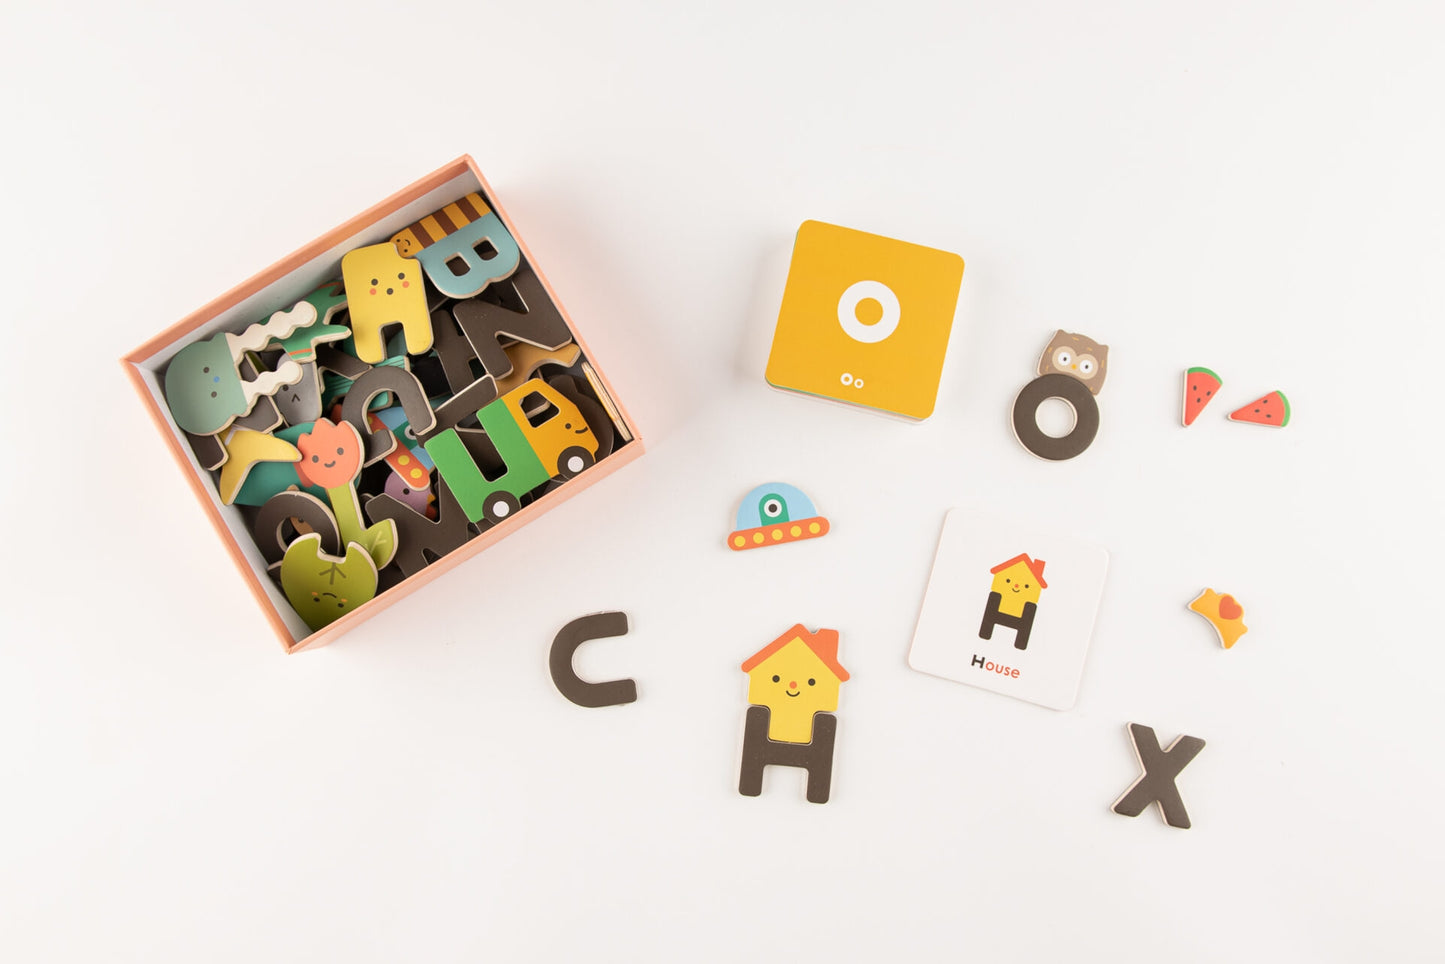 This Magnetic Alphabet Play Set is functional, durable, safe, made in the most environmentally friendly option for the material and production, and needless to say, very beautifully designed. Includes 26 magnetic pieces in capital letters with additional play shaped to match 26 cards.